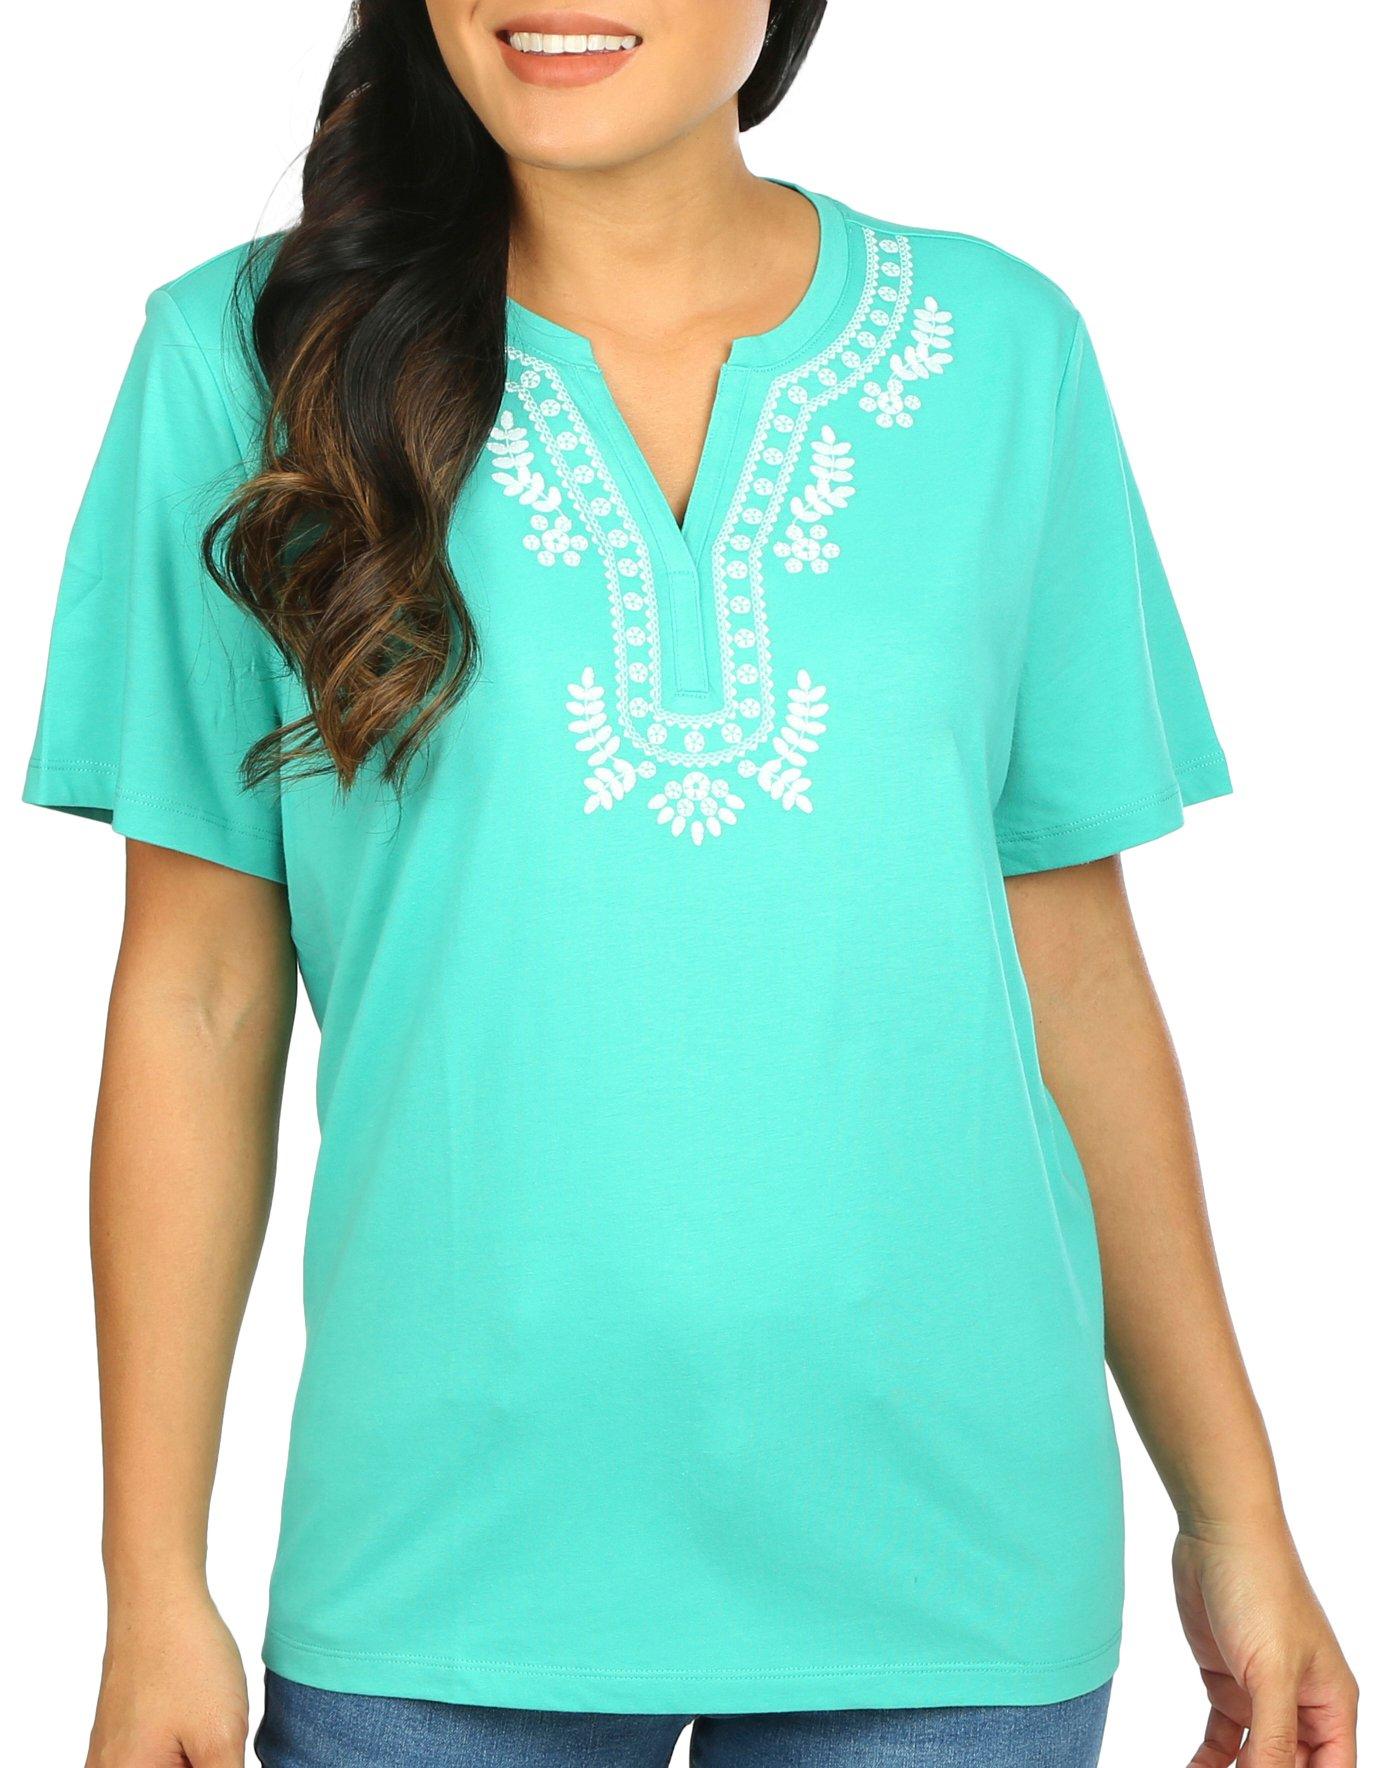 Coral Bay Womens Embroidery Notch Neckline Short Sleeve Tee